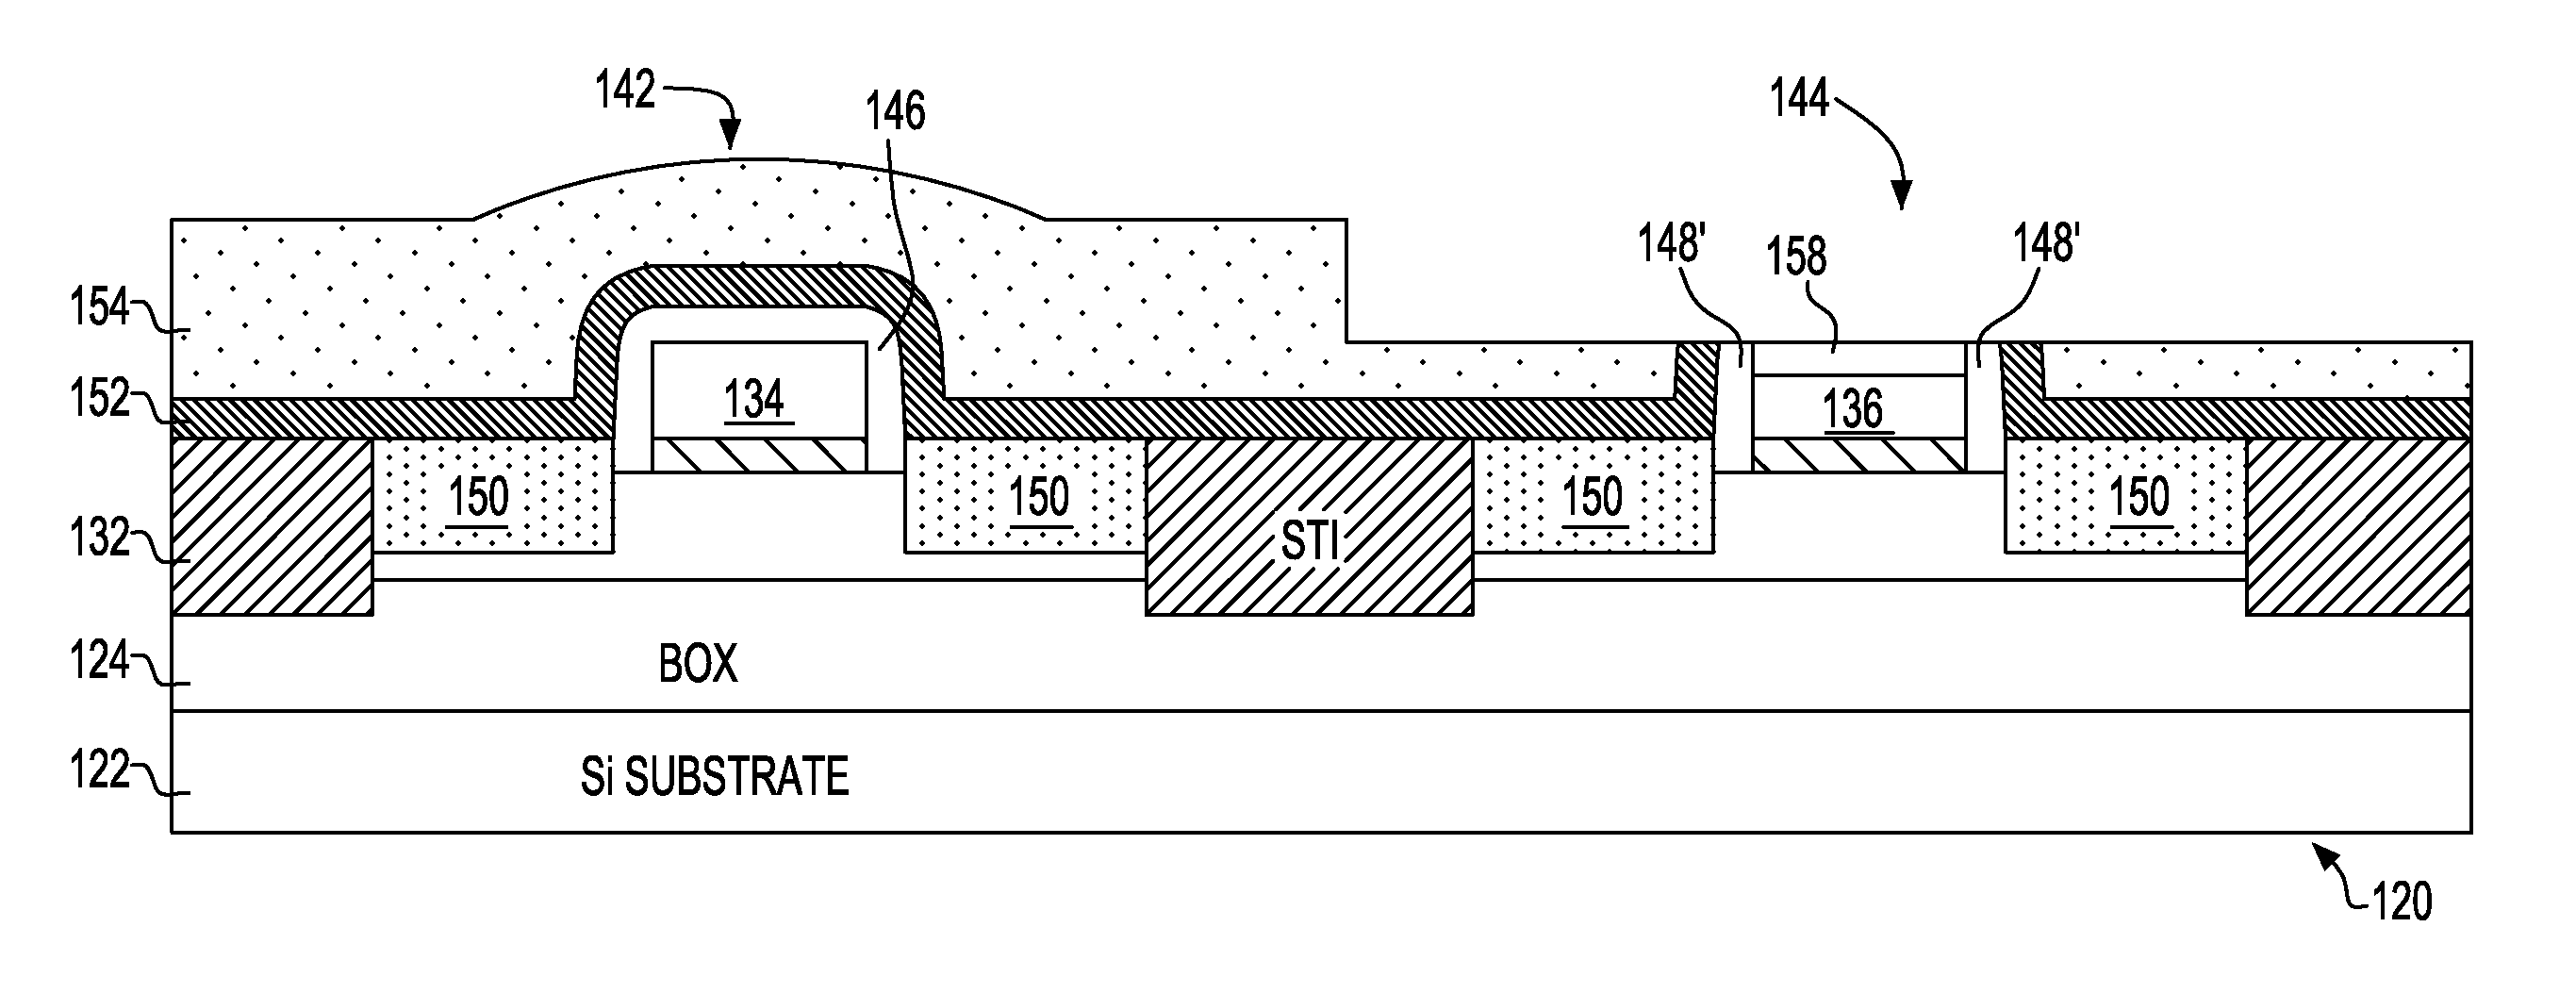 Integrated Circuit (IC) Chip Having Both Metal and Silicon Gate Field Effect Transistors (FETs) and Method of Manufacture